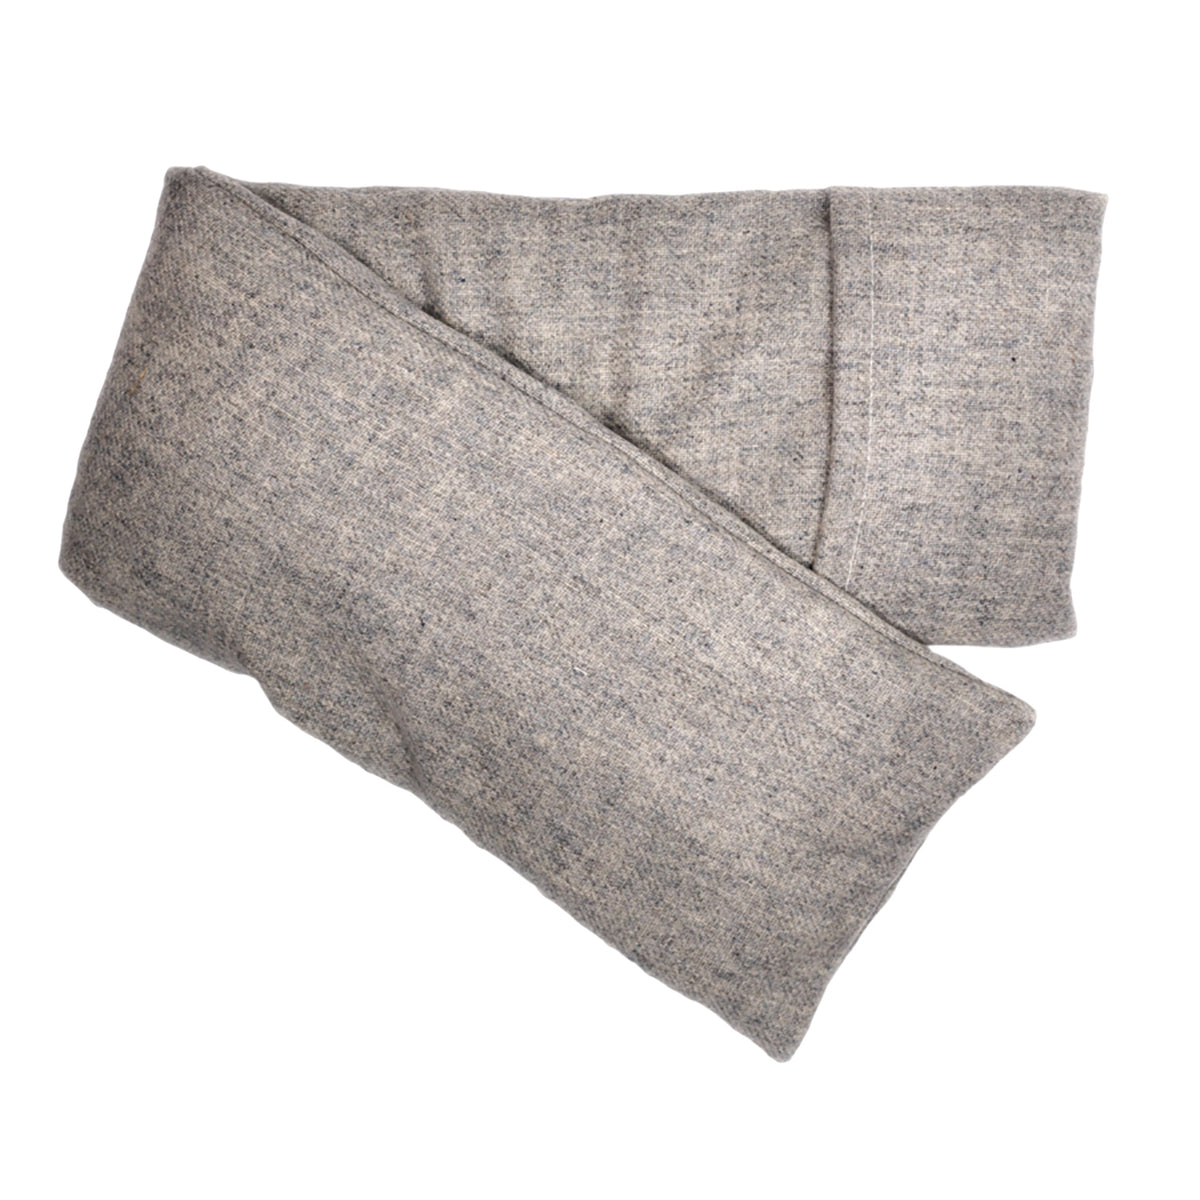 Wool - Heather Gray Hot/Cold Flaxseed Pack